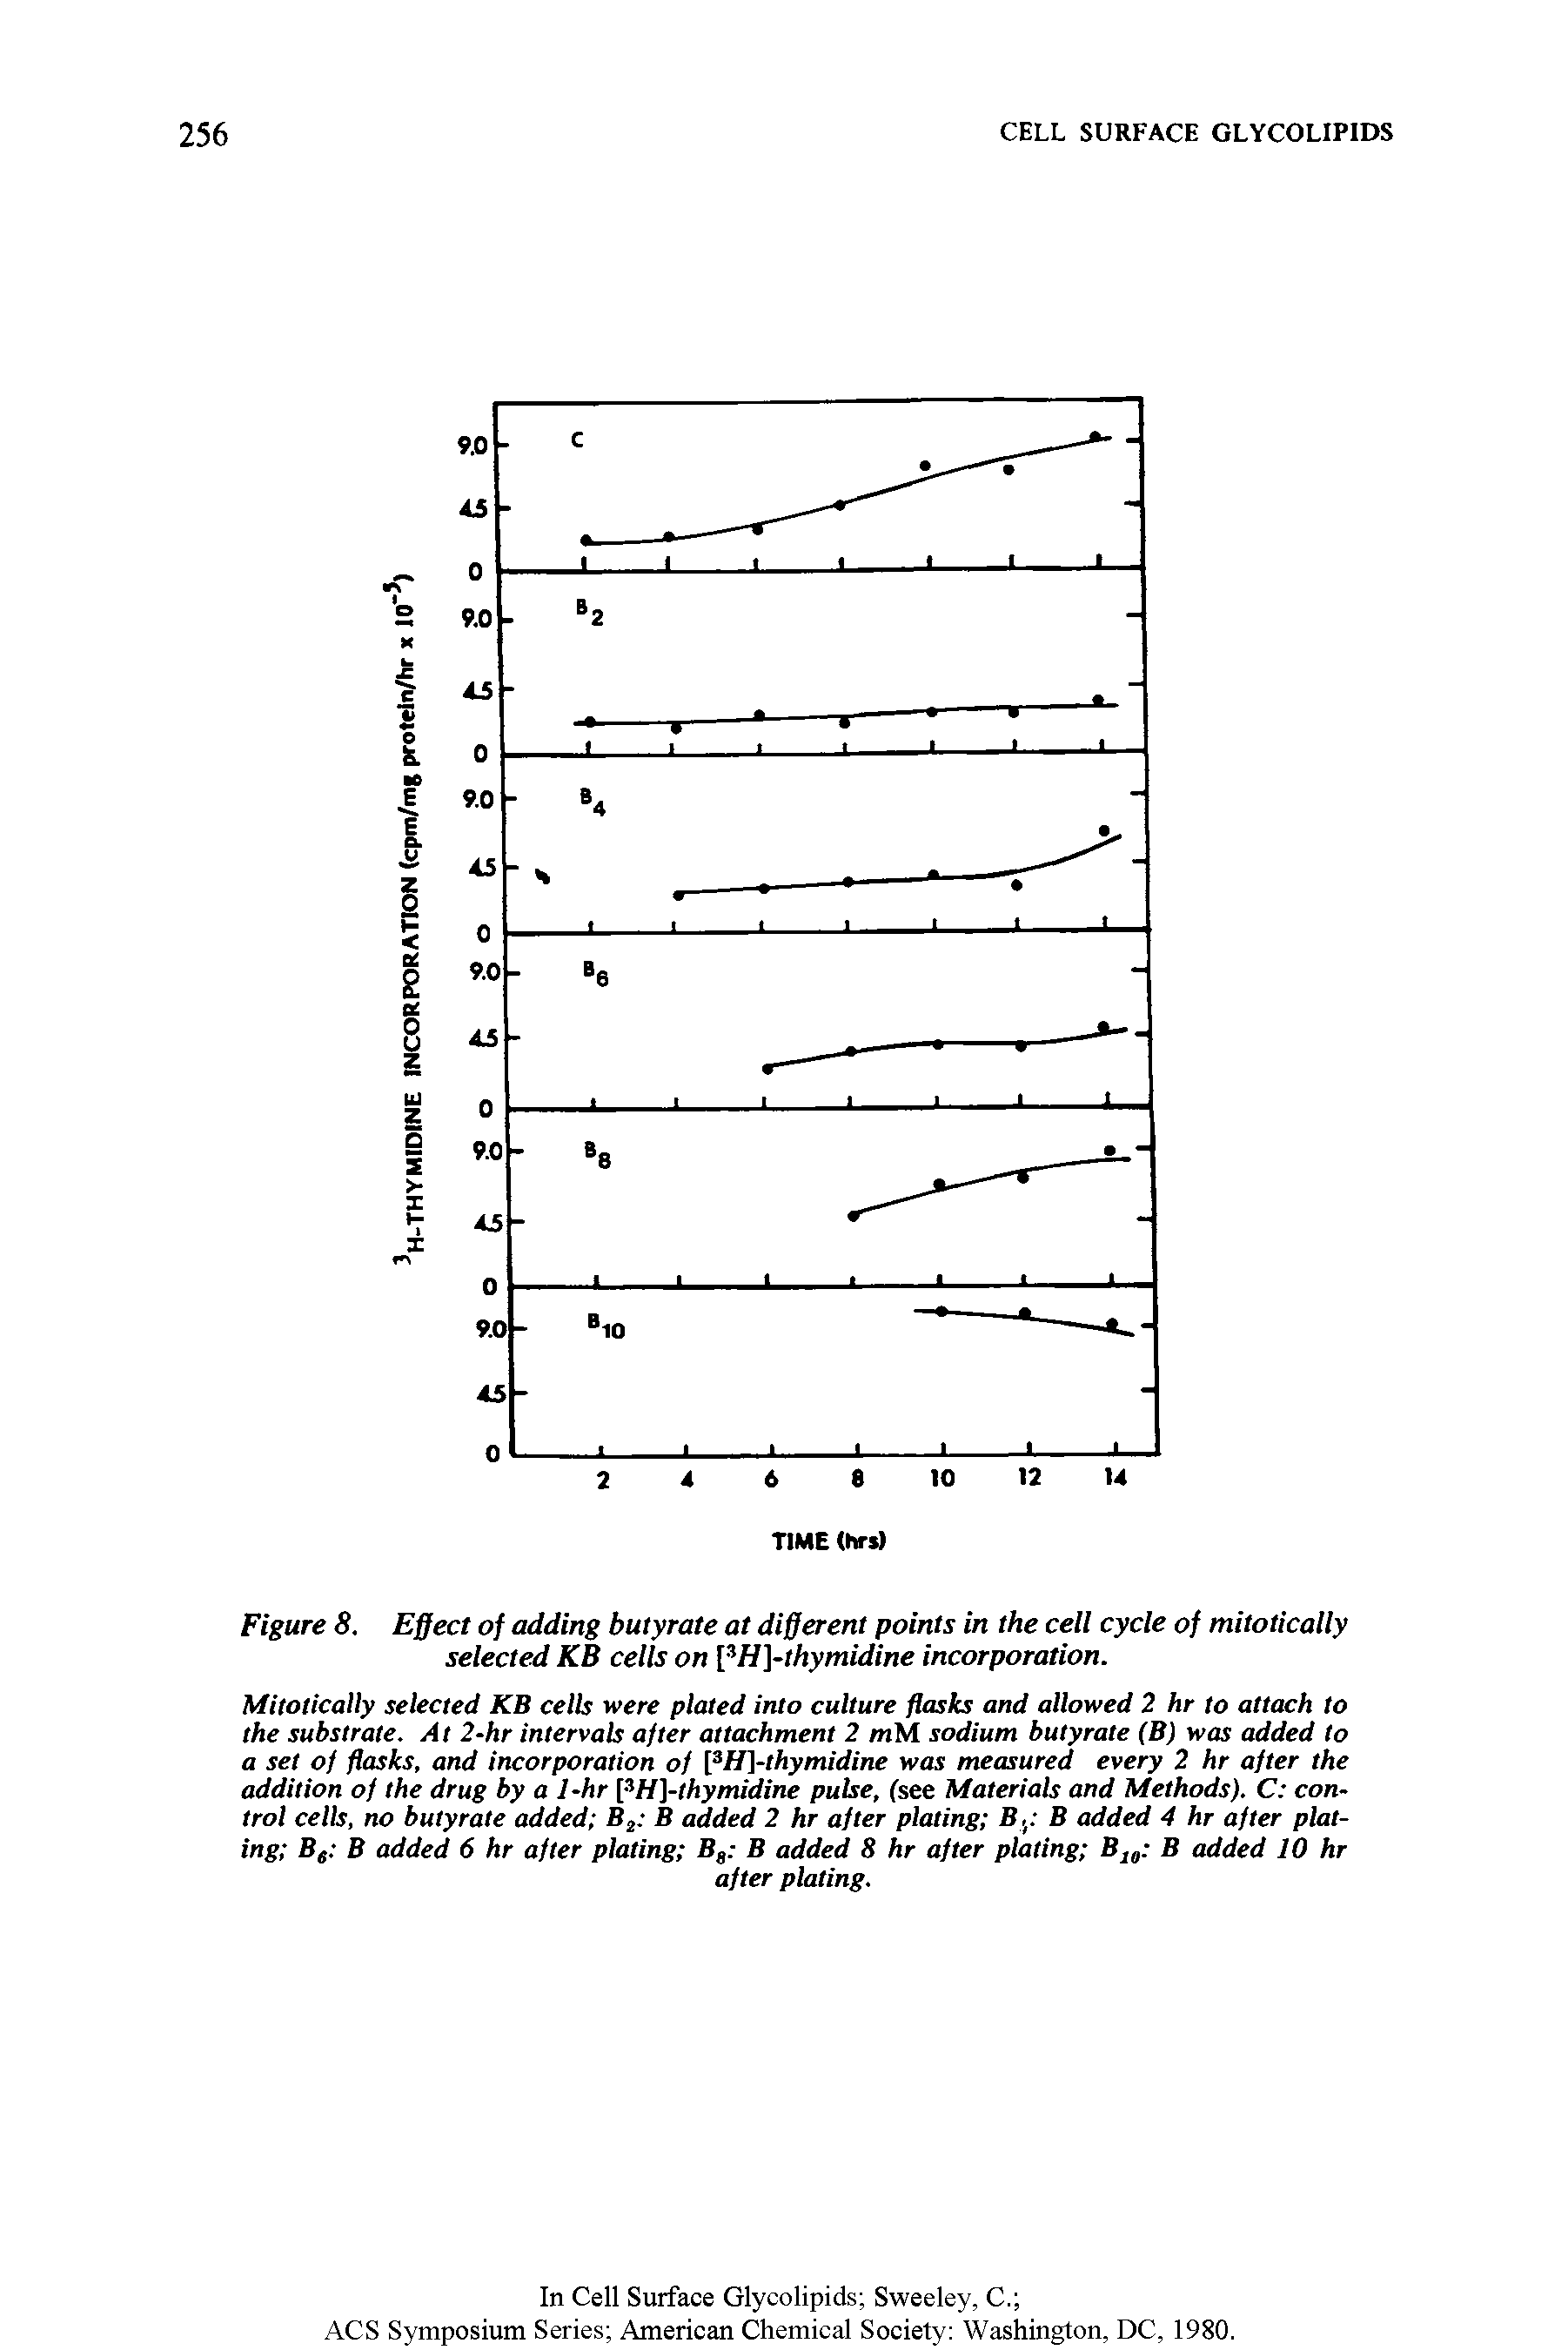 Figure 8. Effect of adding butyrate at different points in the cell cycle of mitotically selected KB cells on [3H]-thymidine incorporation.